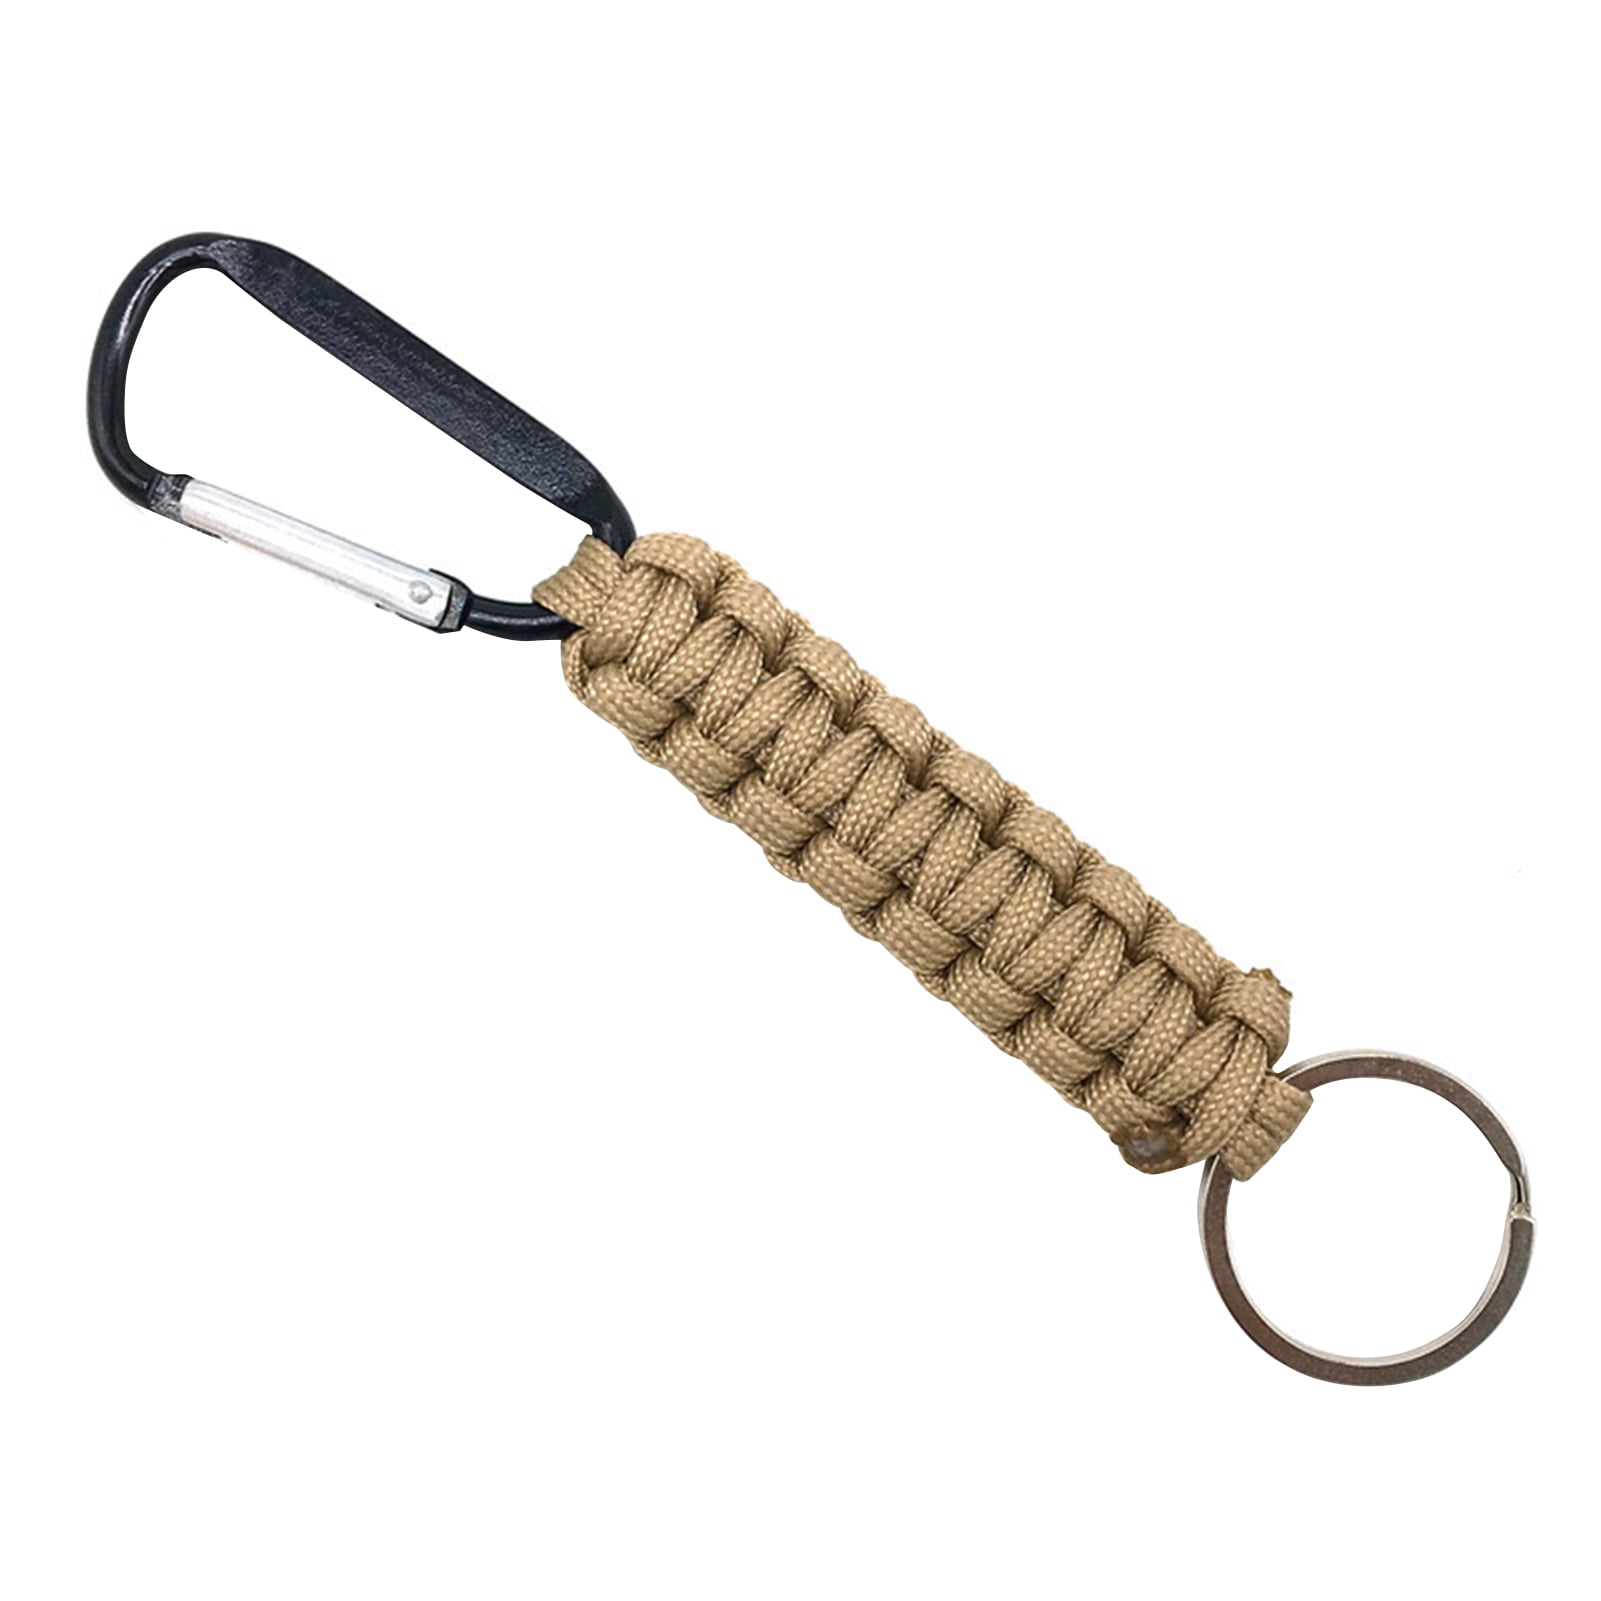 Stainless Steel Ball Pendent Keychain Parachute Cord Key Chain for Outdoor Campi 